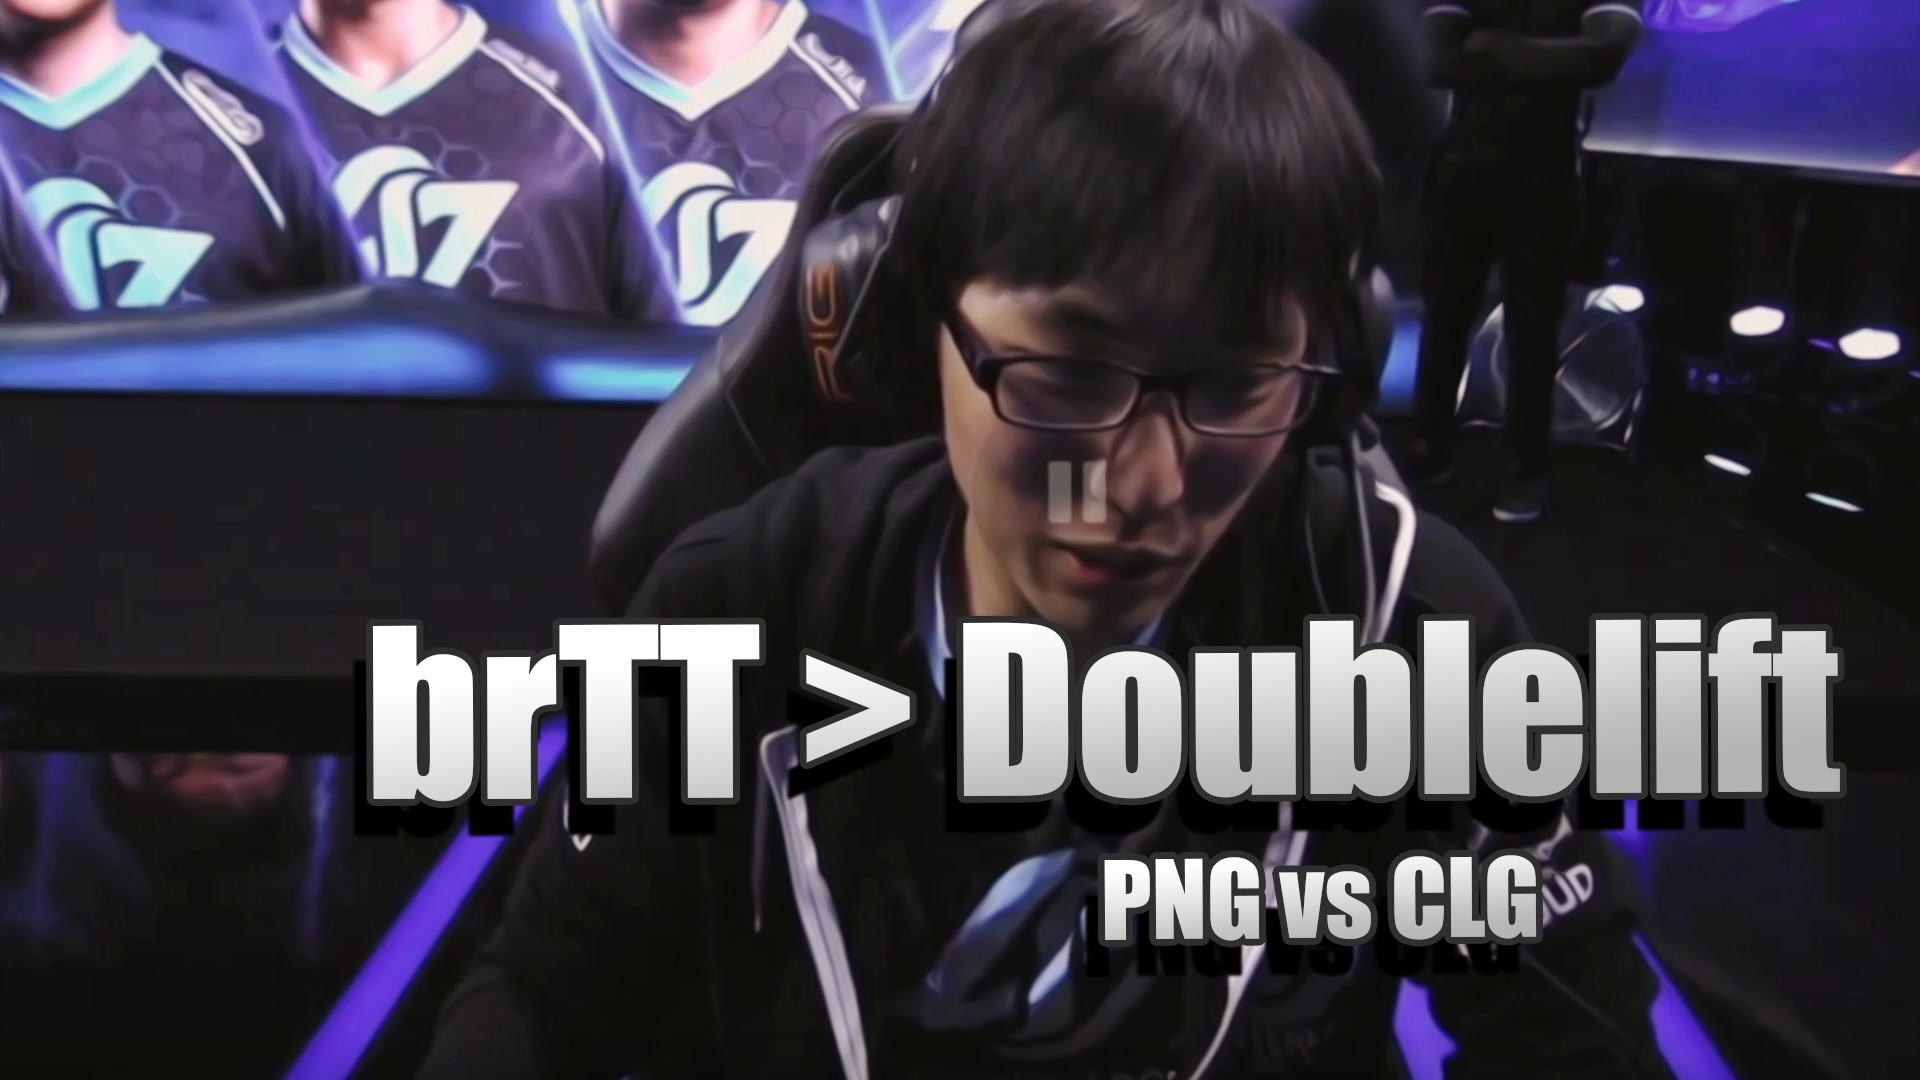 Doublelift about reading messages saying Pain Gaming brTT is better than Doublelift – PNG vs CLG – YouTube